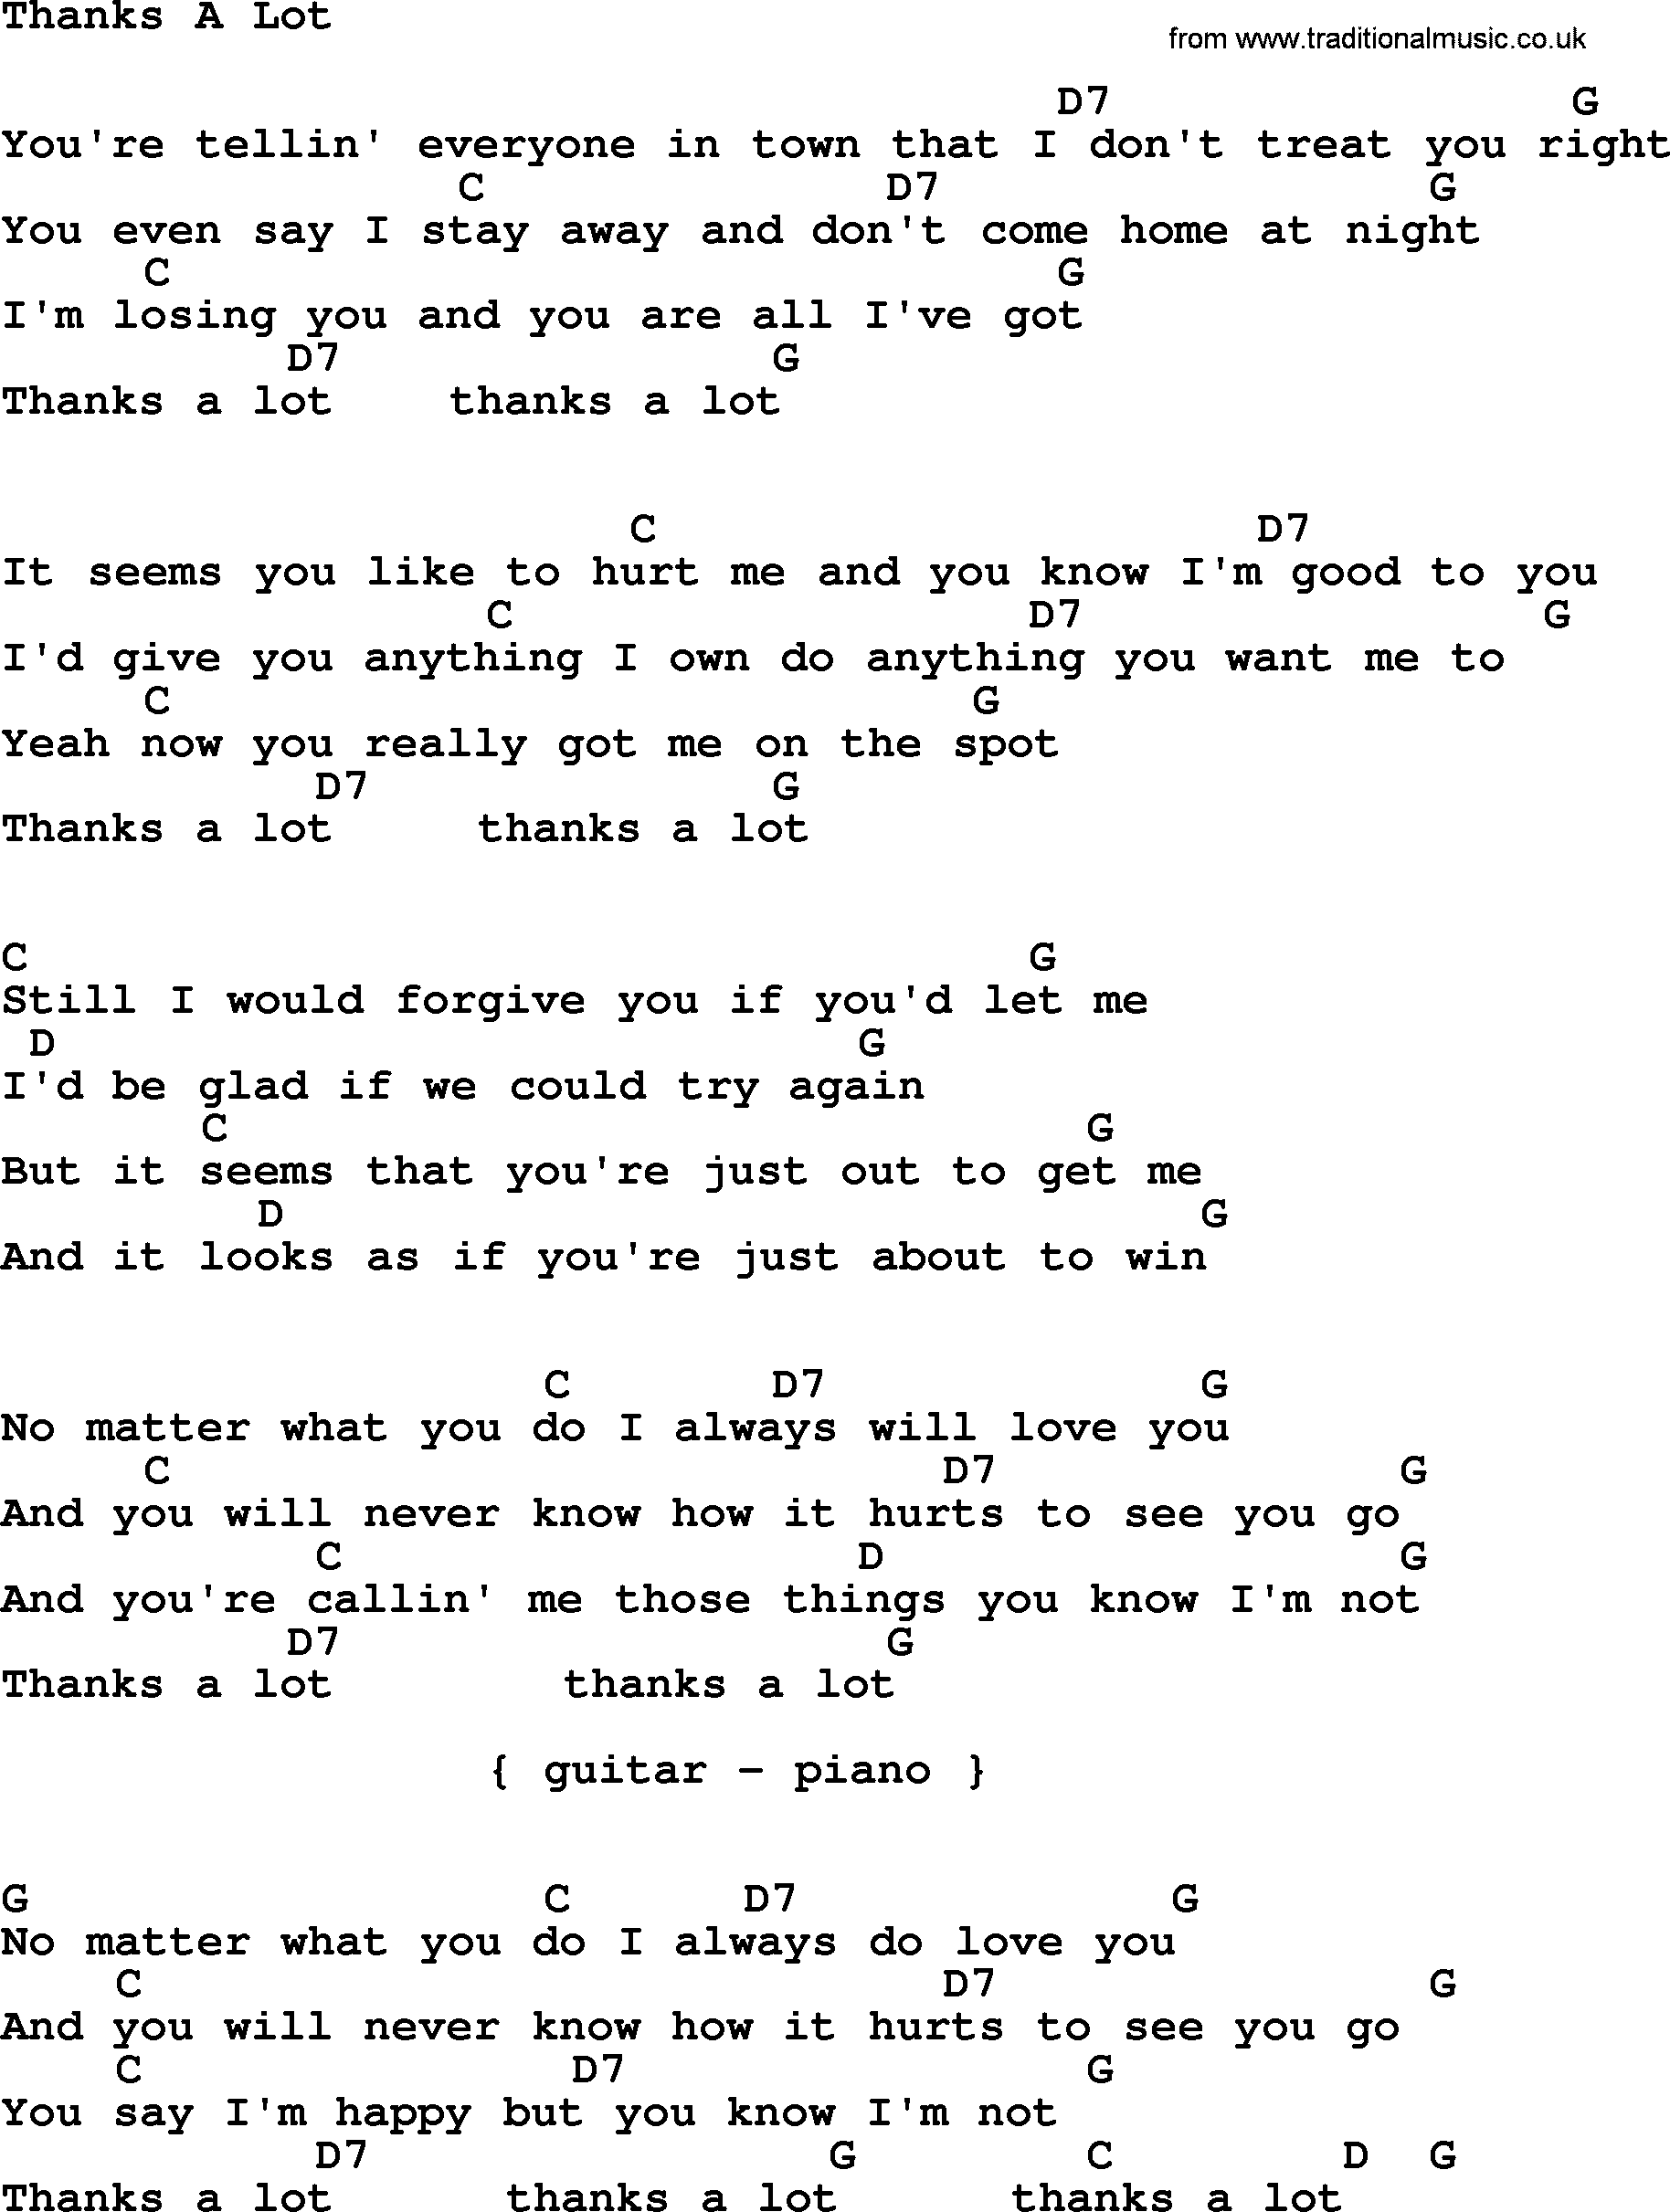 Johnny Cash song Thanks A Lot, lyrics and chords